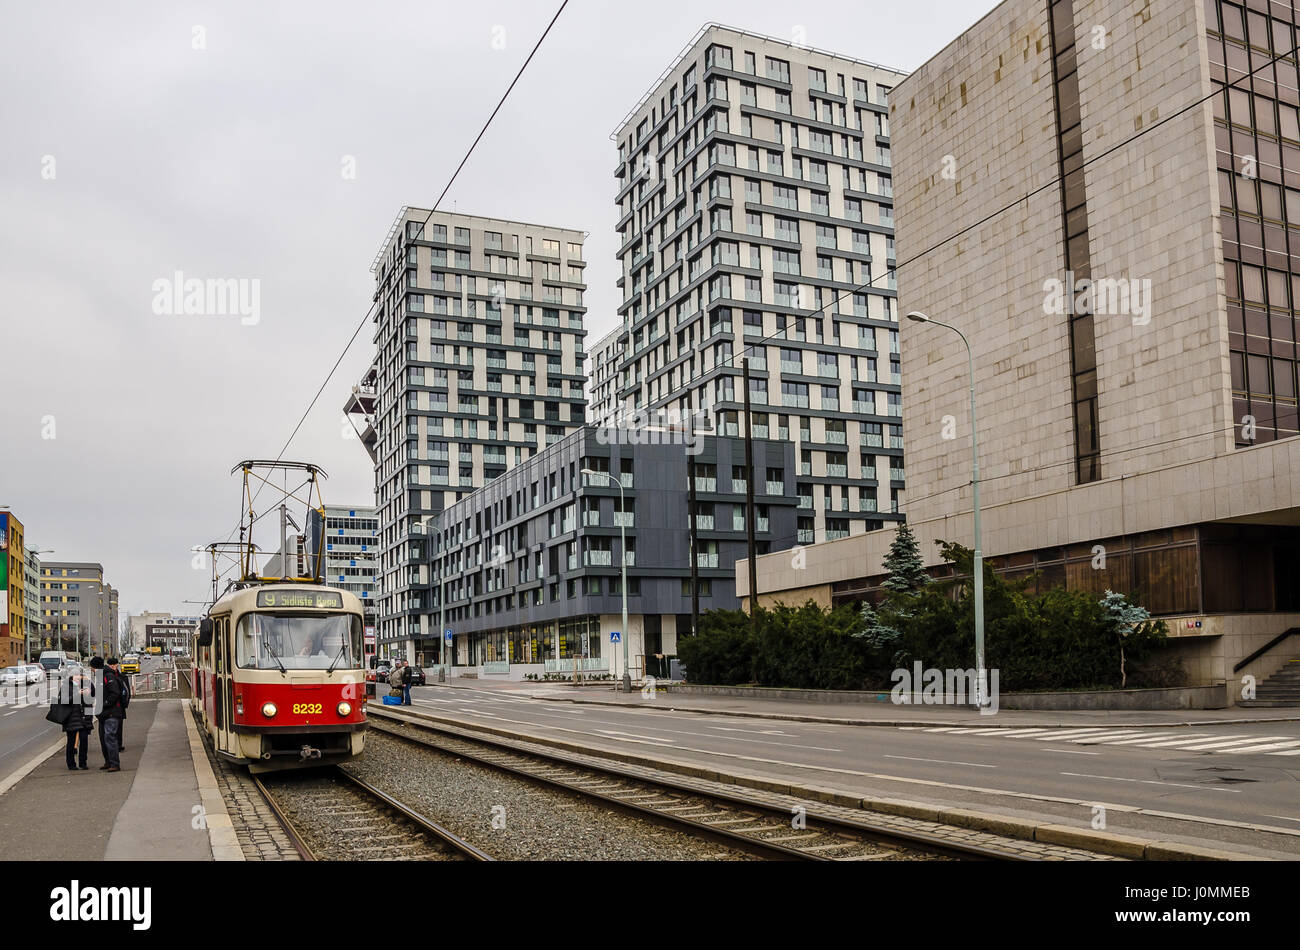 The Prague tramway (streetcar) network is the largest such network in the Czech Republic. Stock Photo